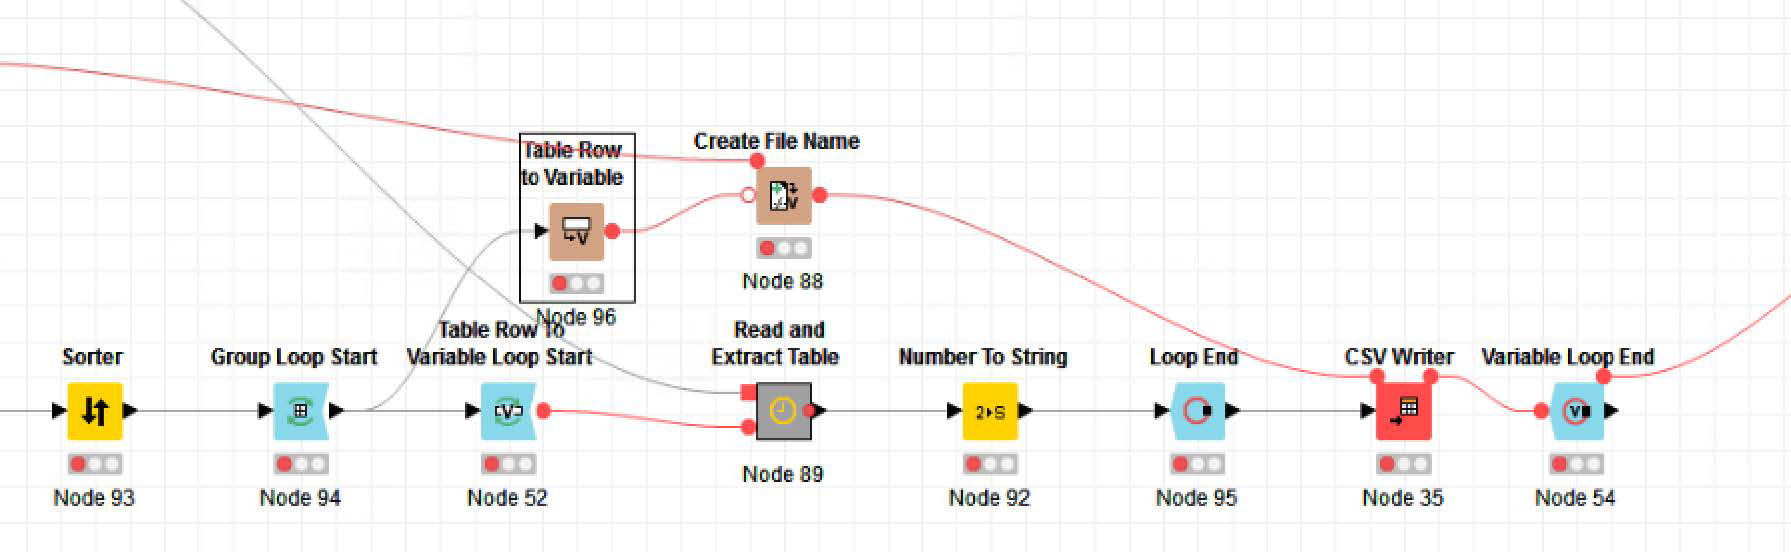 High level KNIME workflow